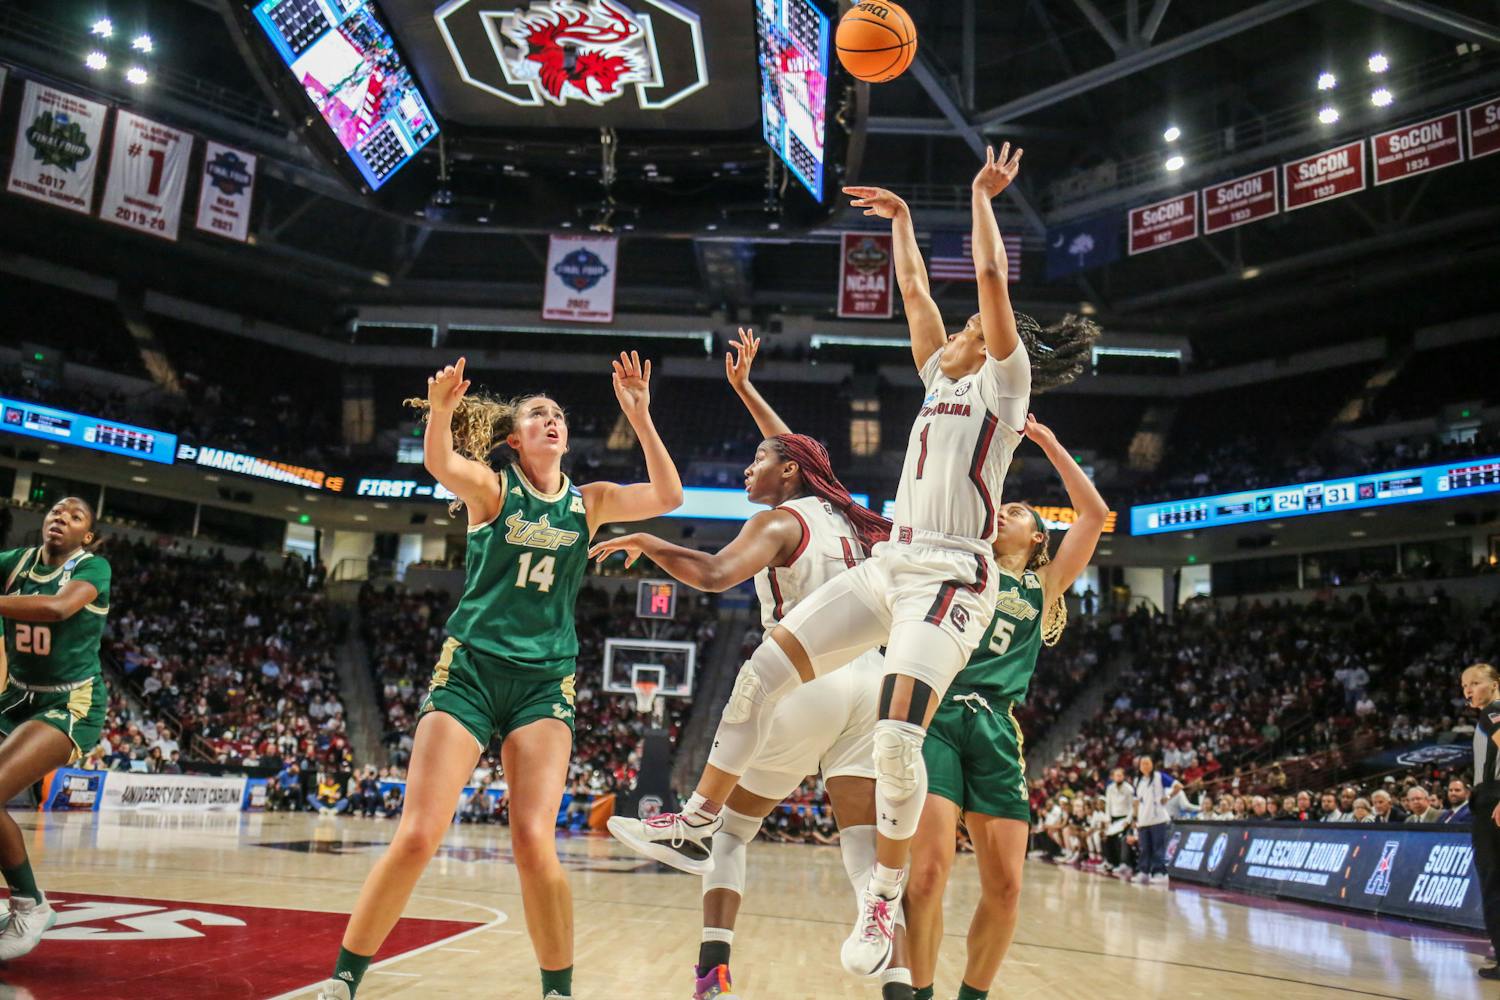 Senior guard Zia Cooke goes up for a shot during South Carolina’s game against South Florida in round two of the NCAA tournament at Colonial Life Arena on March 19, 2023. The Gamecocks defeated the Bulls 76-45.